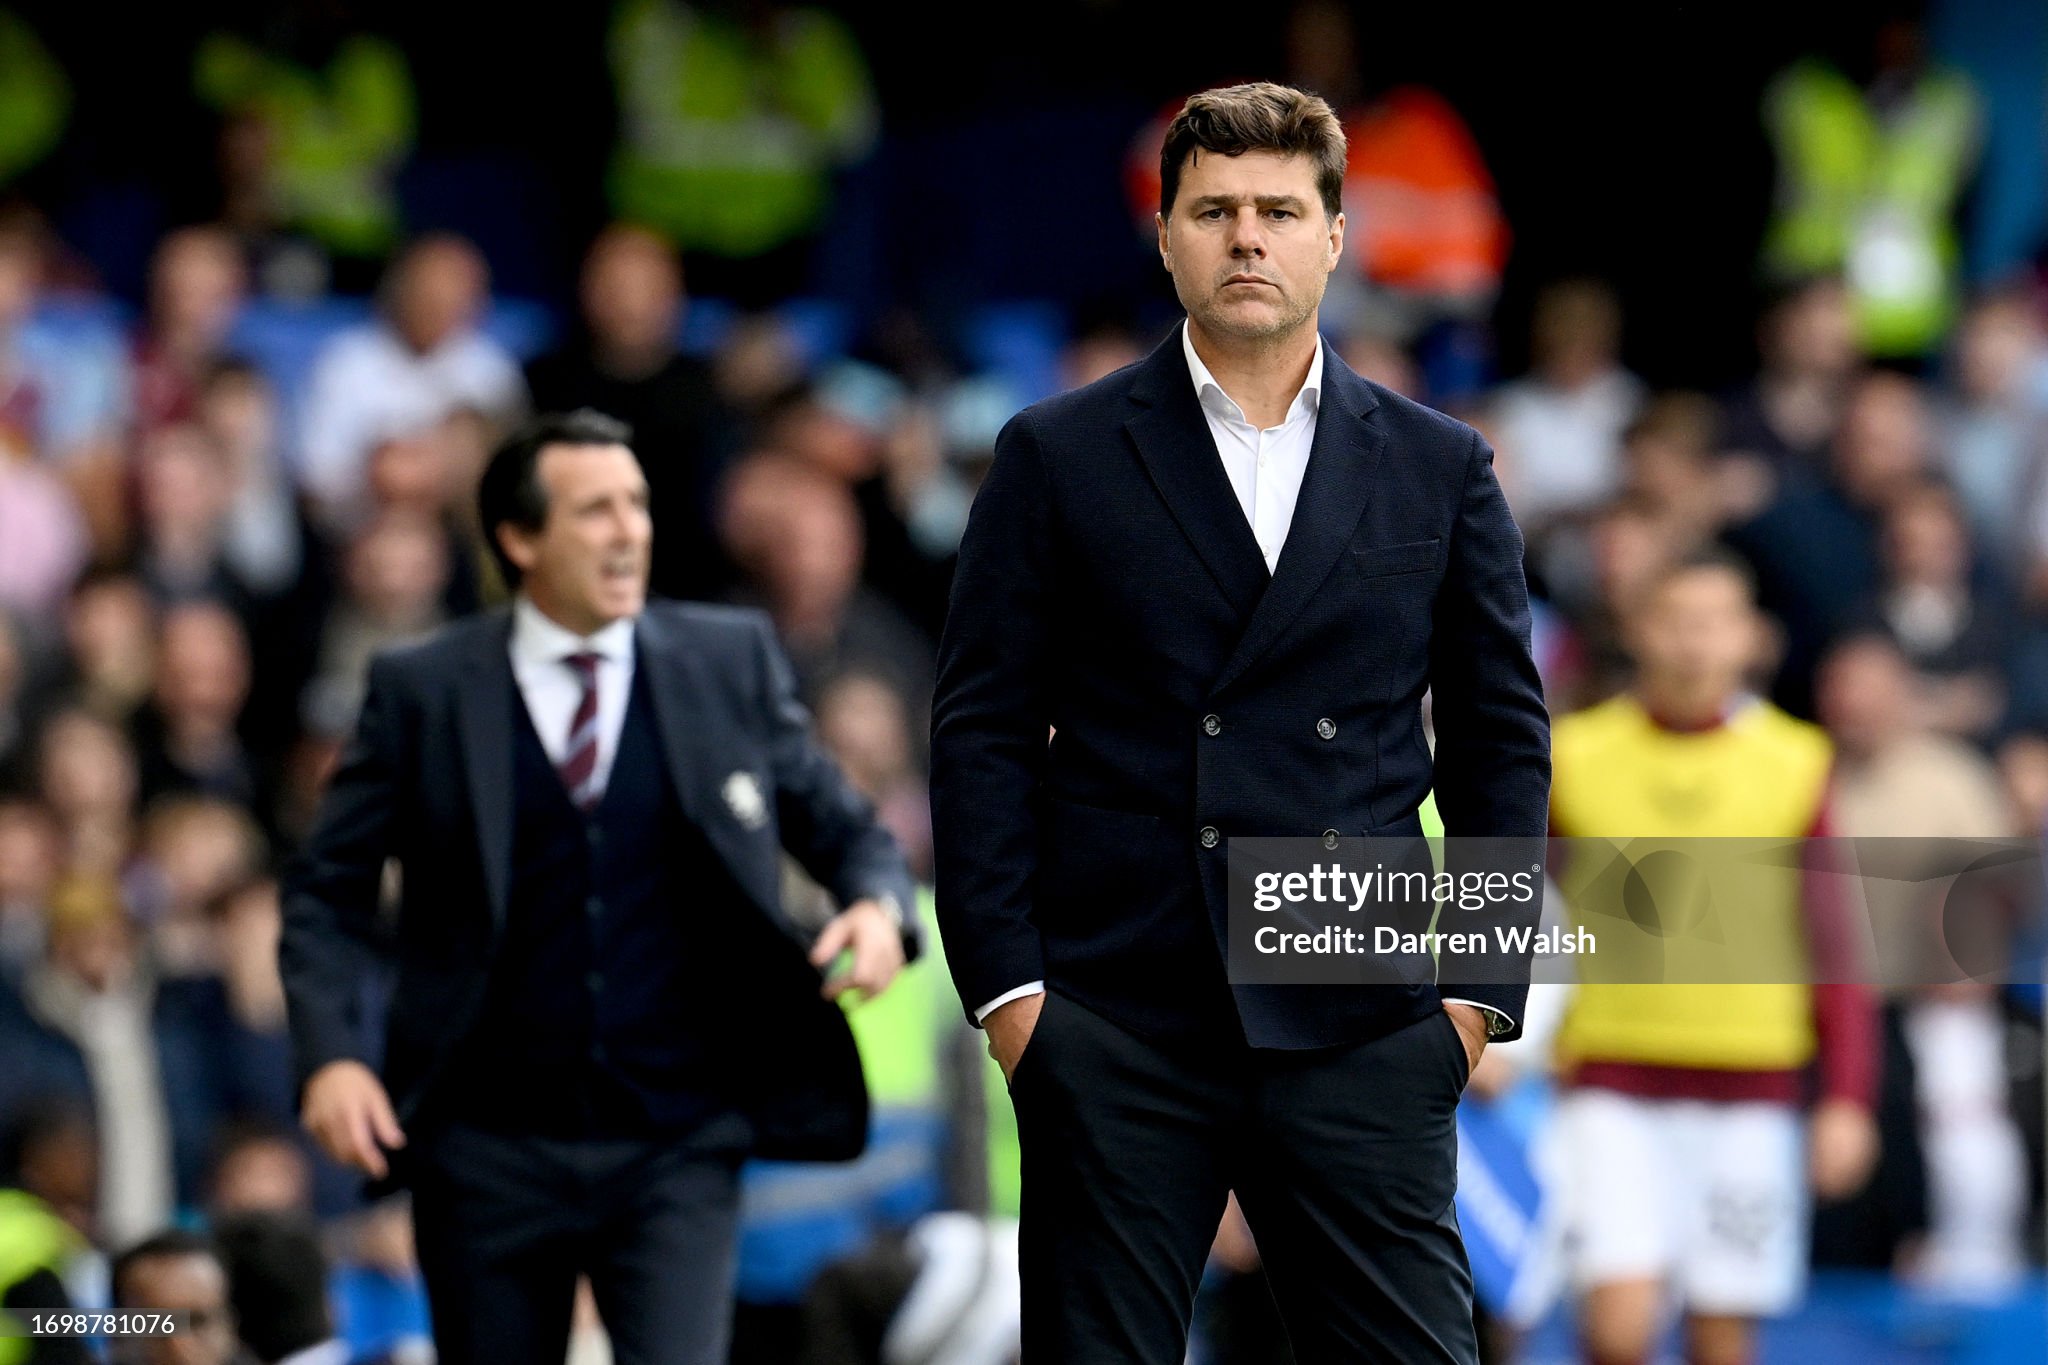 Pochettino warmly welcomes club owners into the dressing room